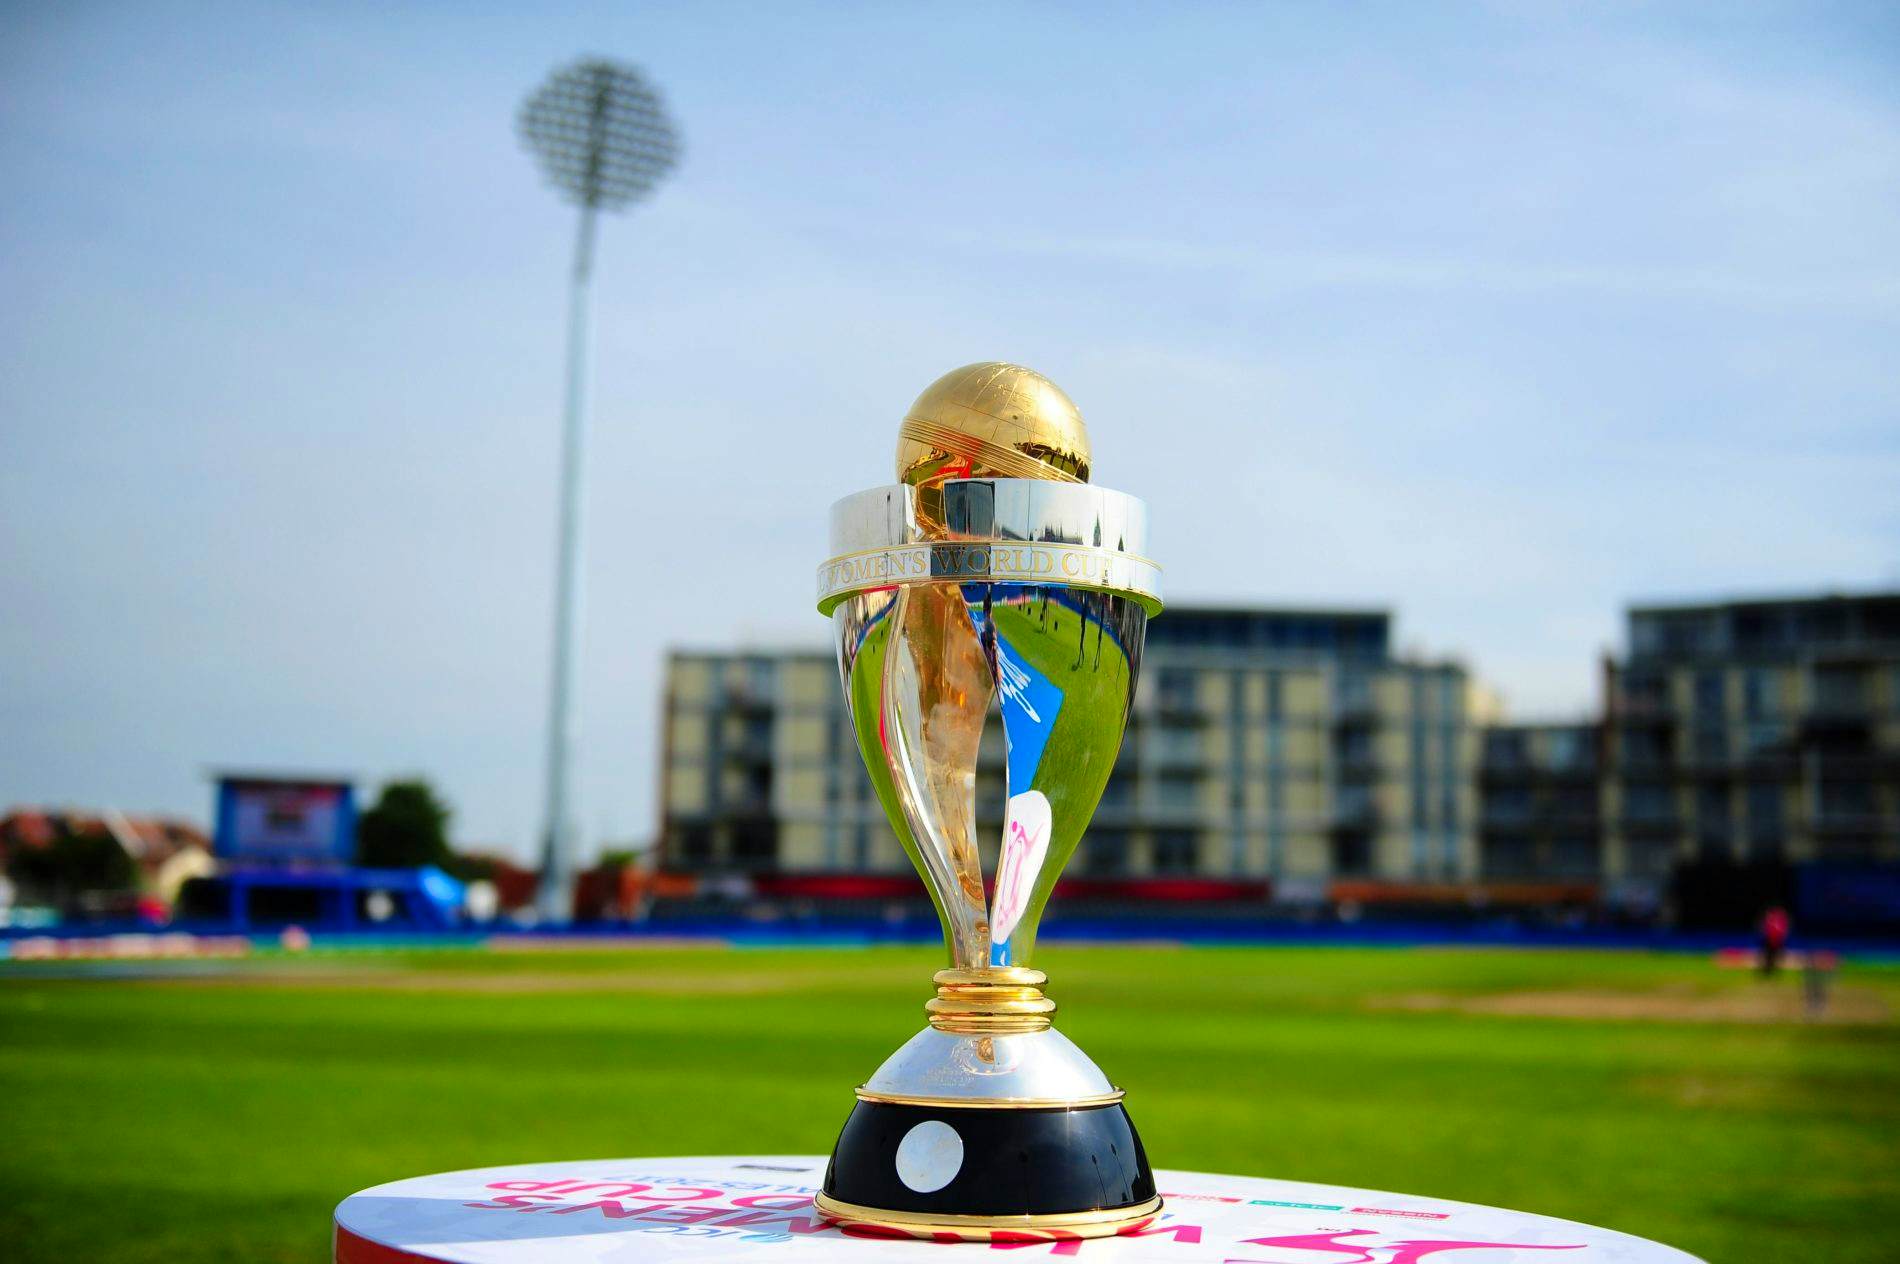 ICC T20 World Cup (Women) - Finals At Melbourne Cricket Ground, Melbourne valid only on March 8, 2020